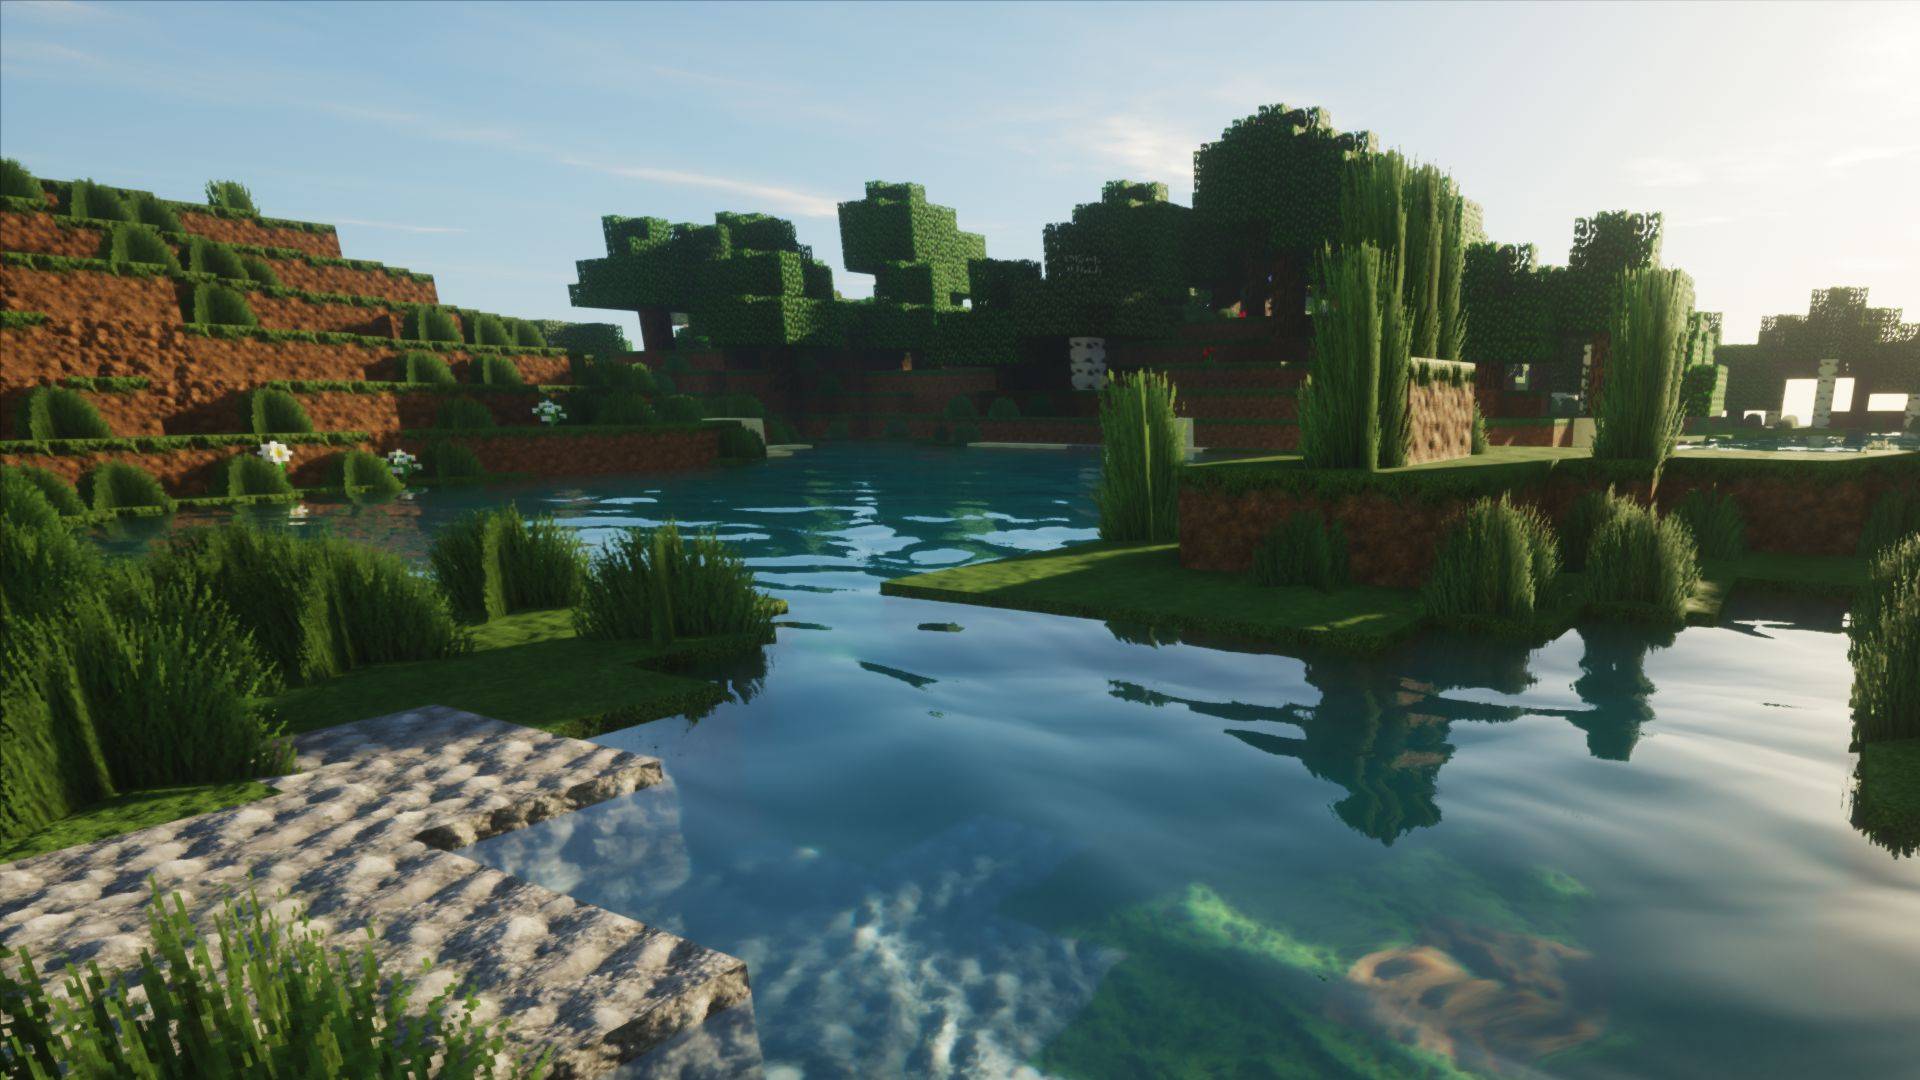 Minecraft Survival with Ray Tracing ON - Minecraft With RTX